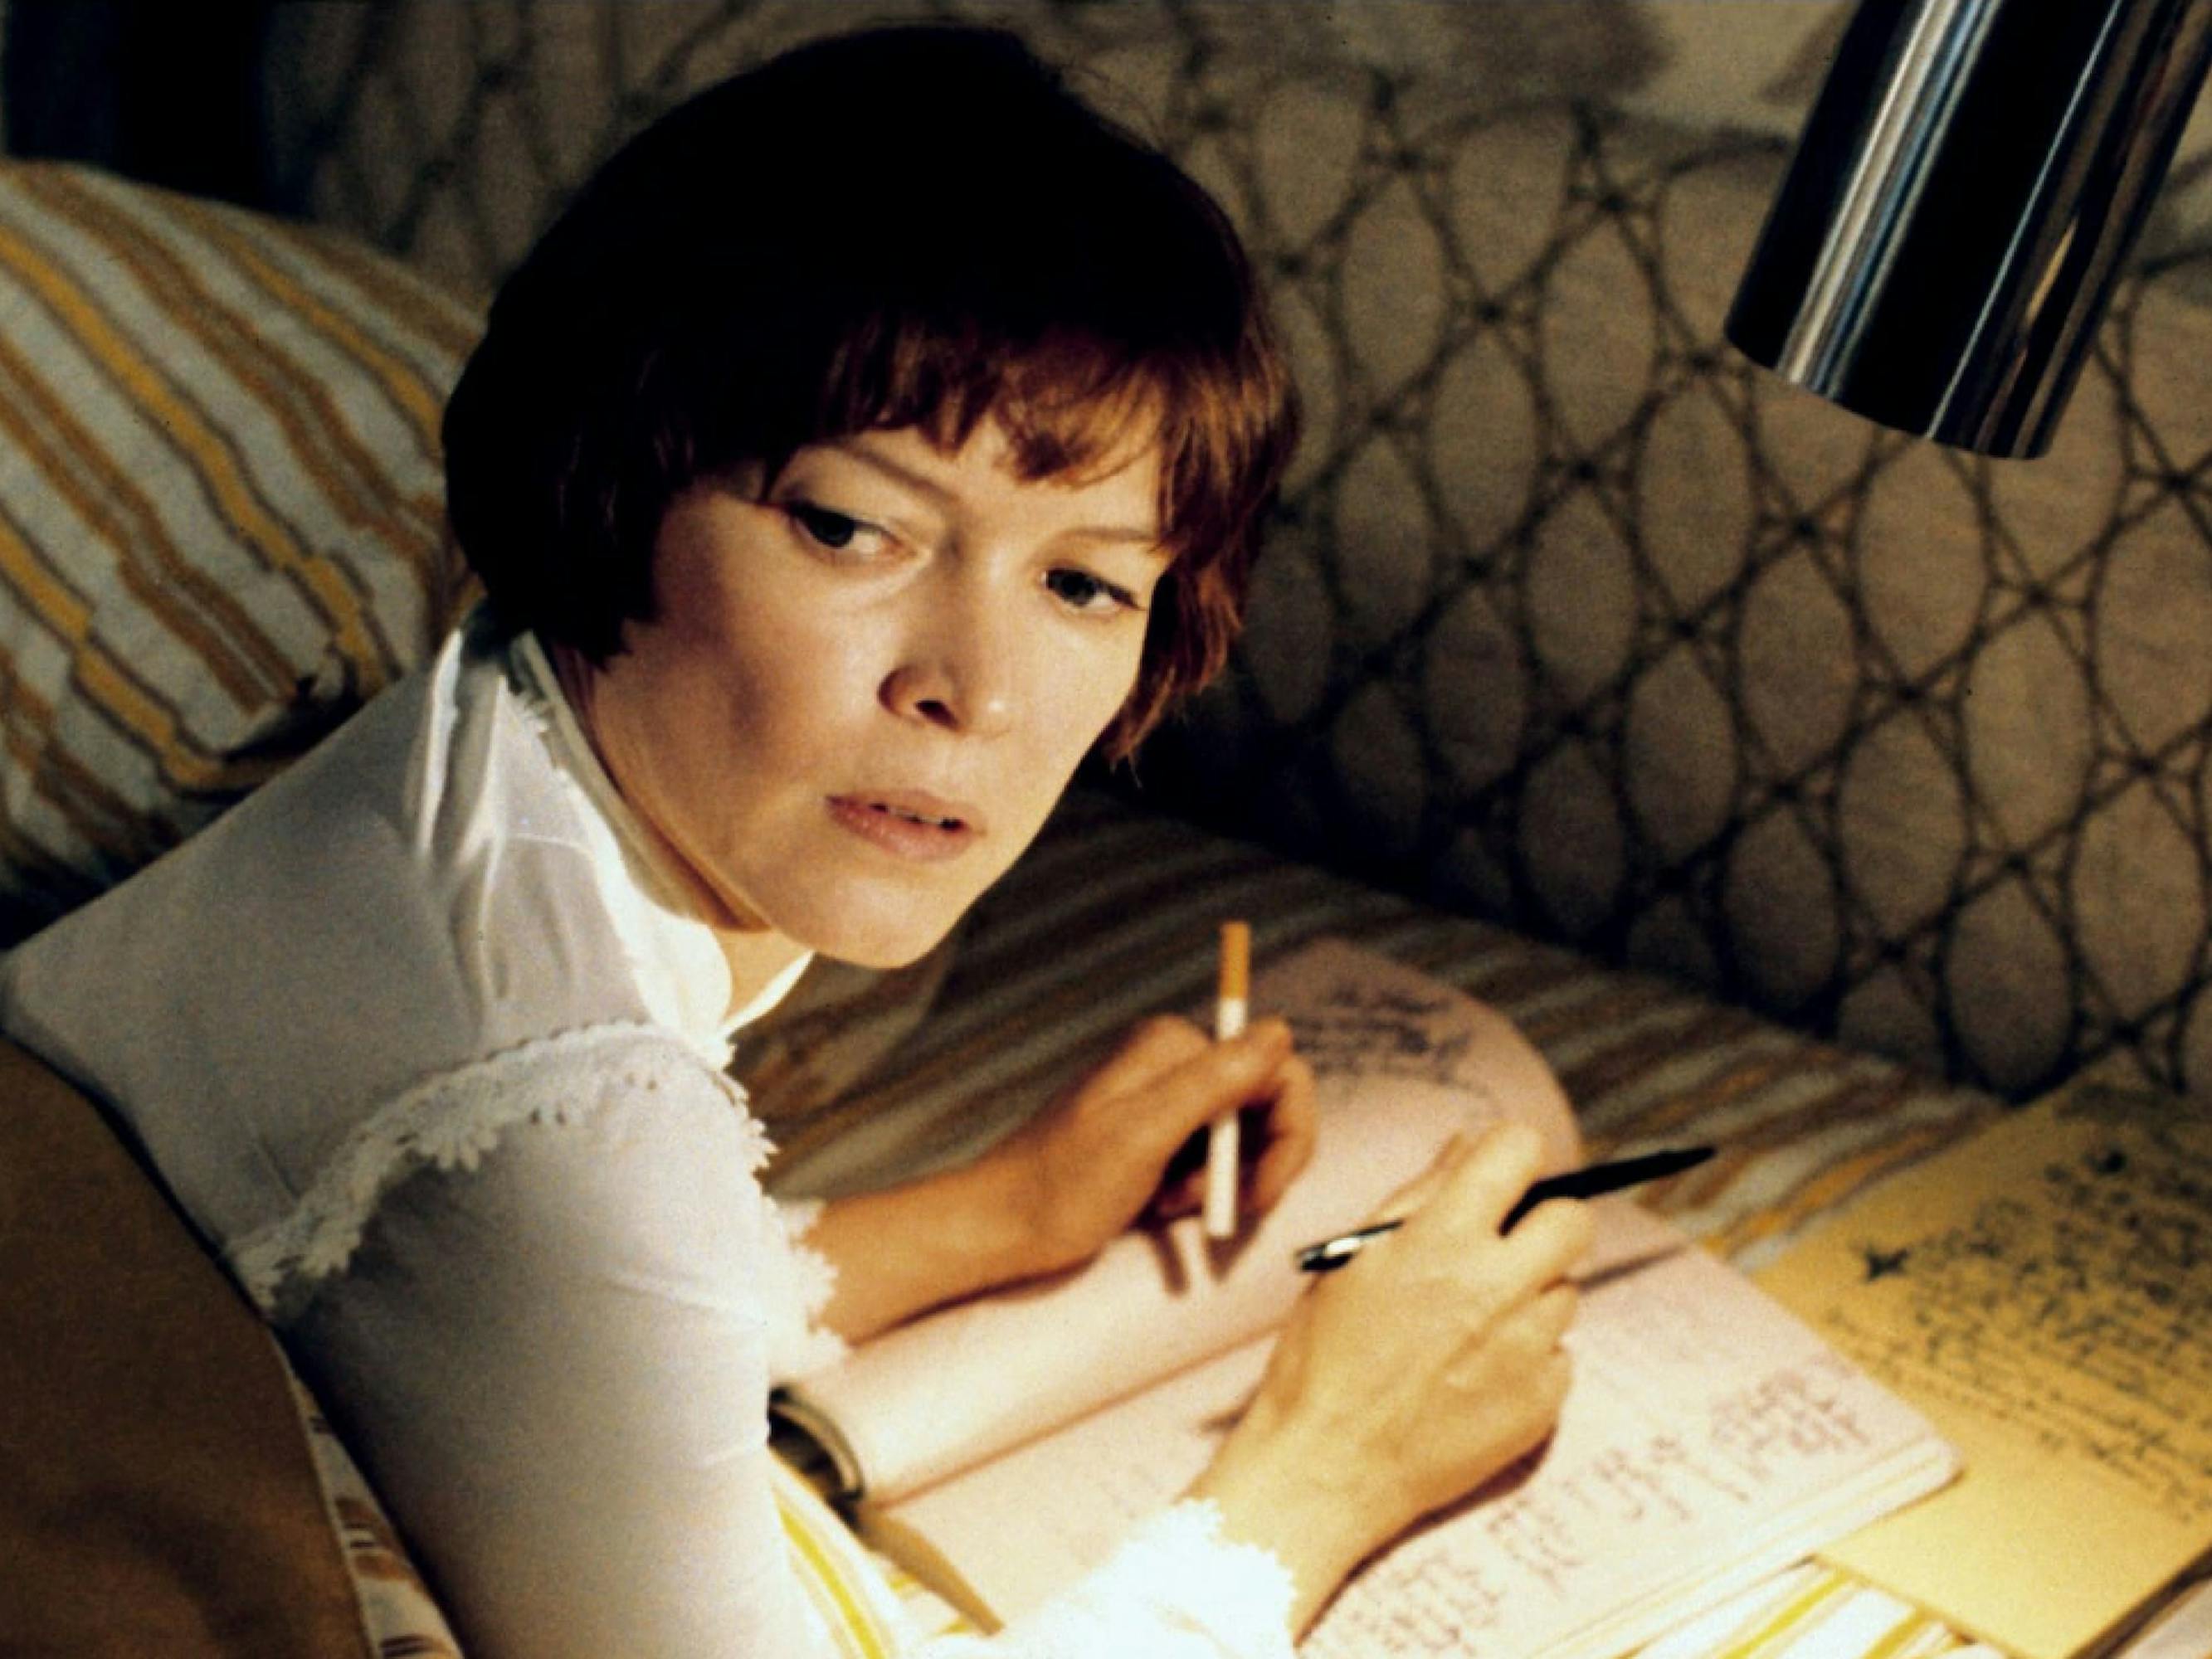 Ellen Burstyn as Chris MacNeil in a still from The Exorcist. She’s lying in bed, writing in a notebook. She looks up, alarmed. 